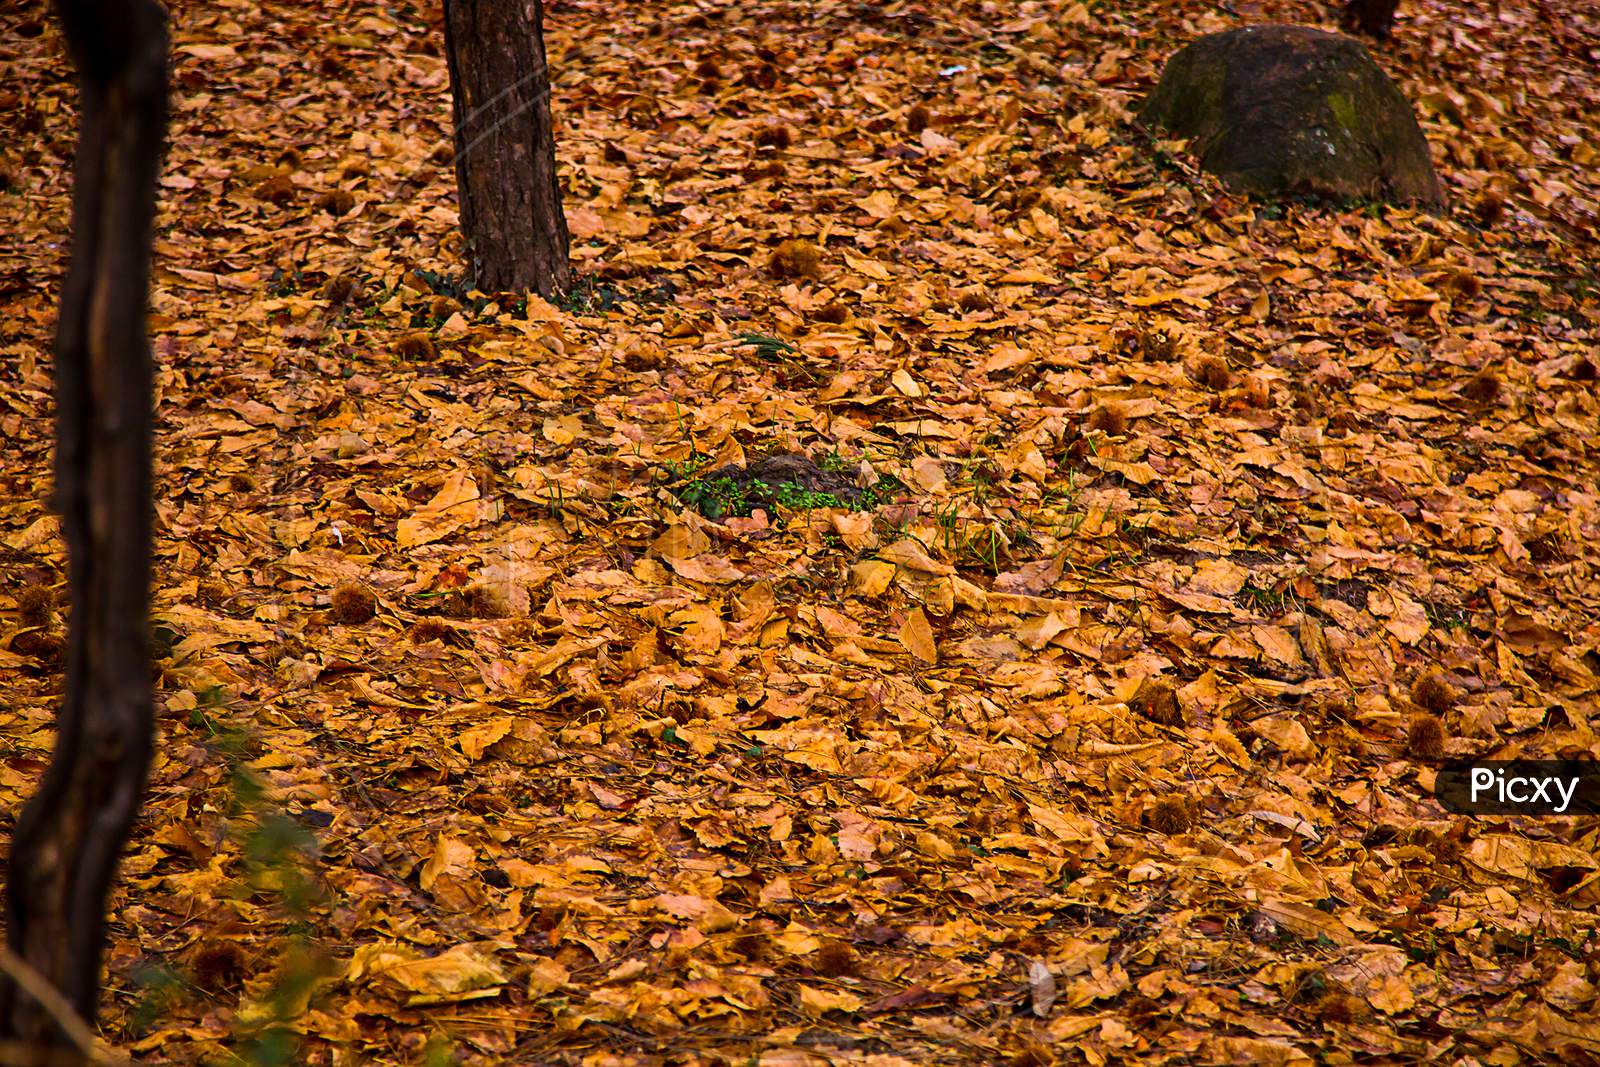 Fallen Autumn Leaves On The Ground, Background - Image